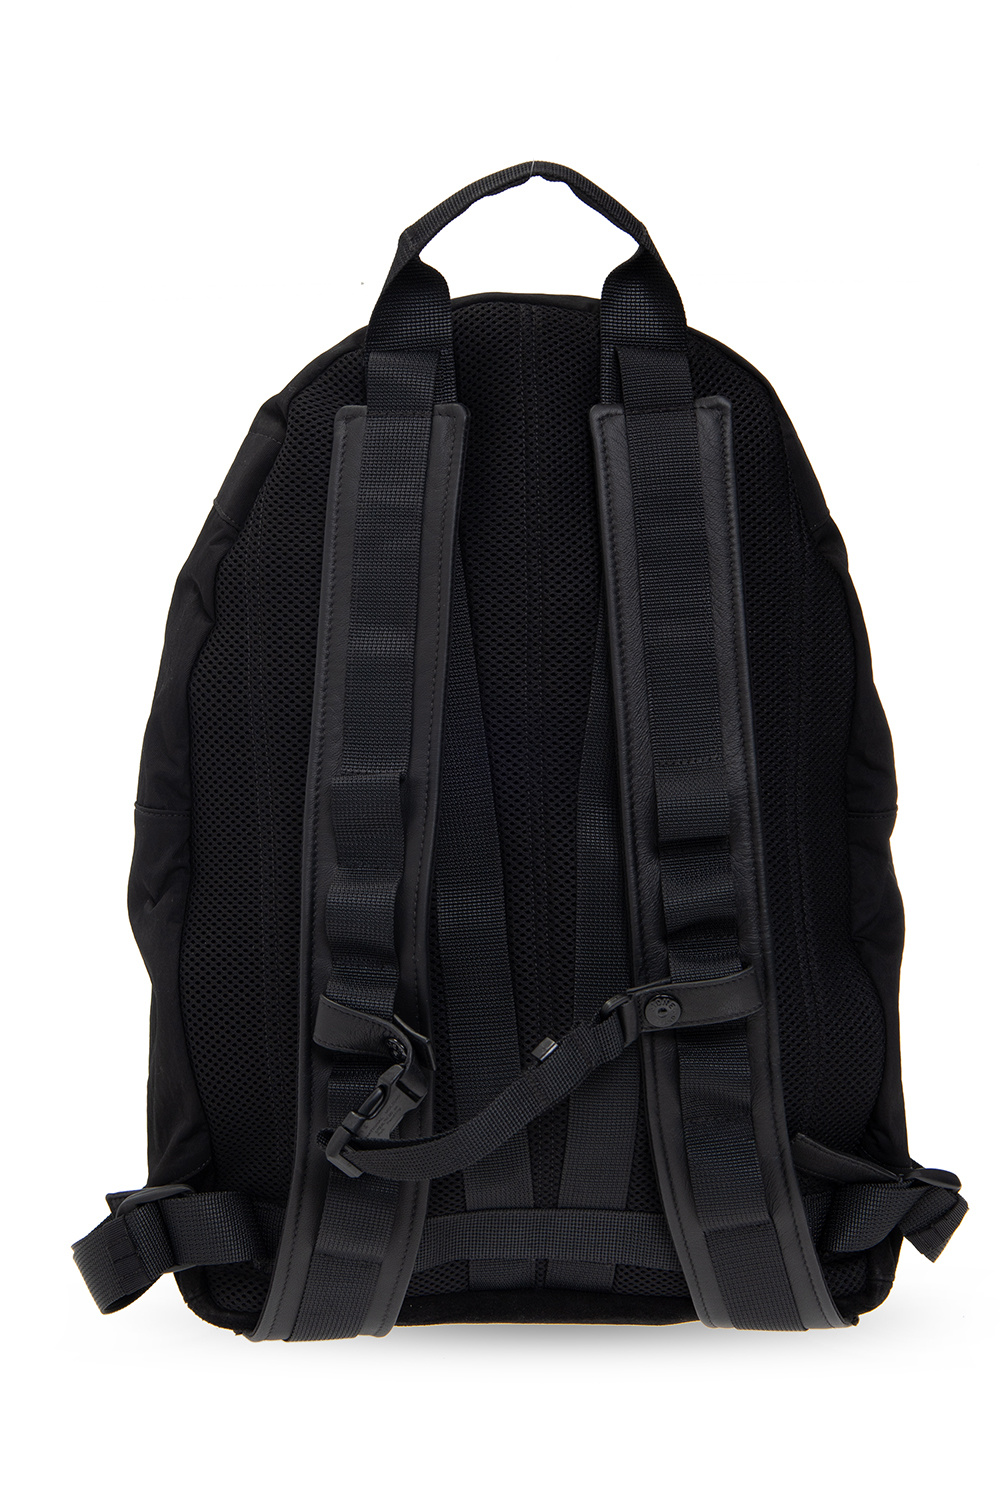 Stone Island Backpack with logo | Men's Bags | IetpShops